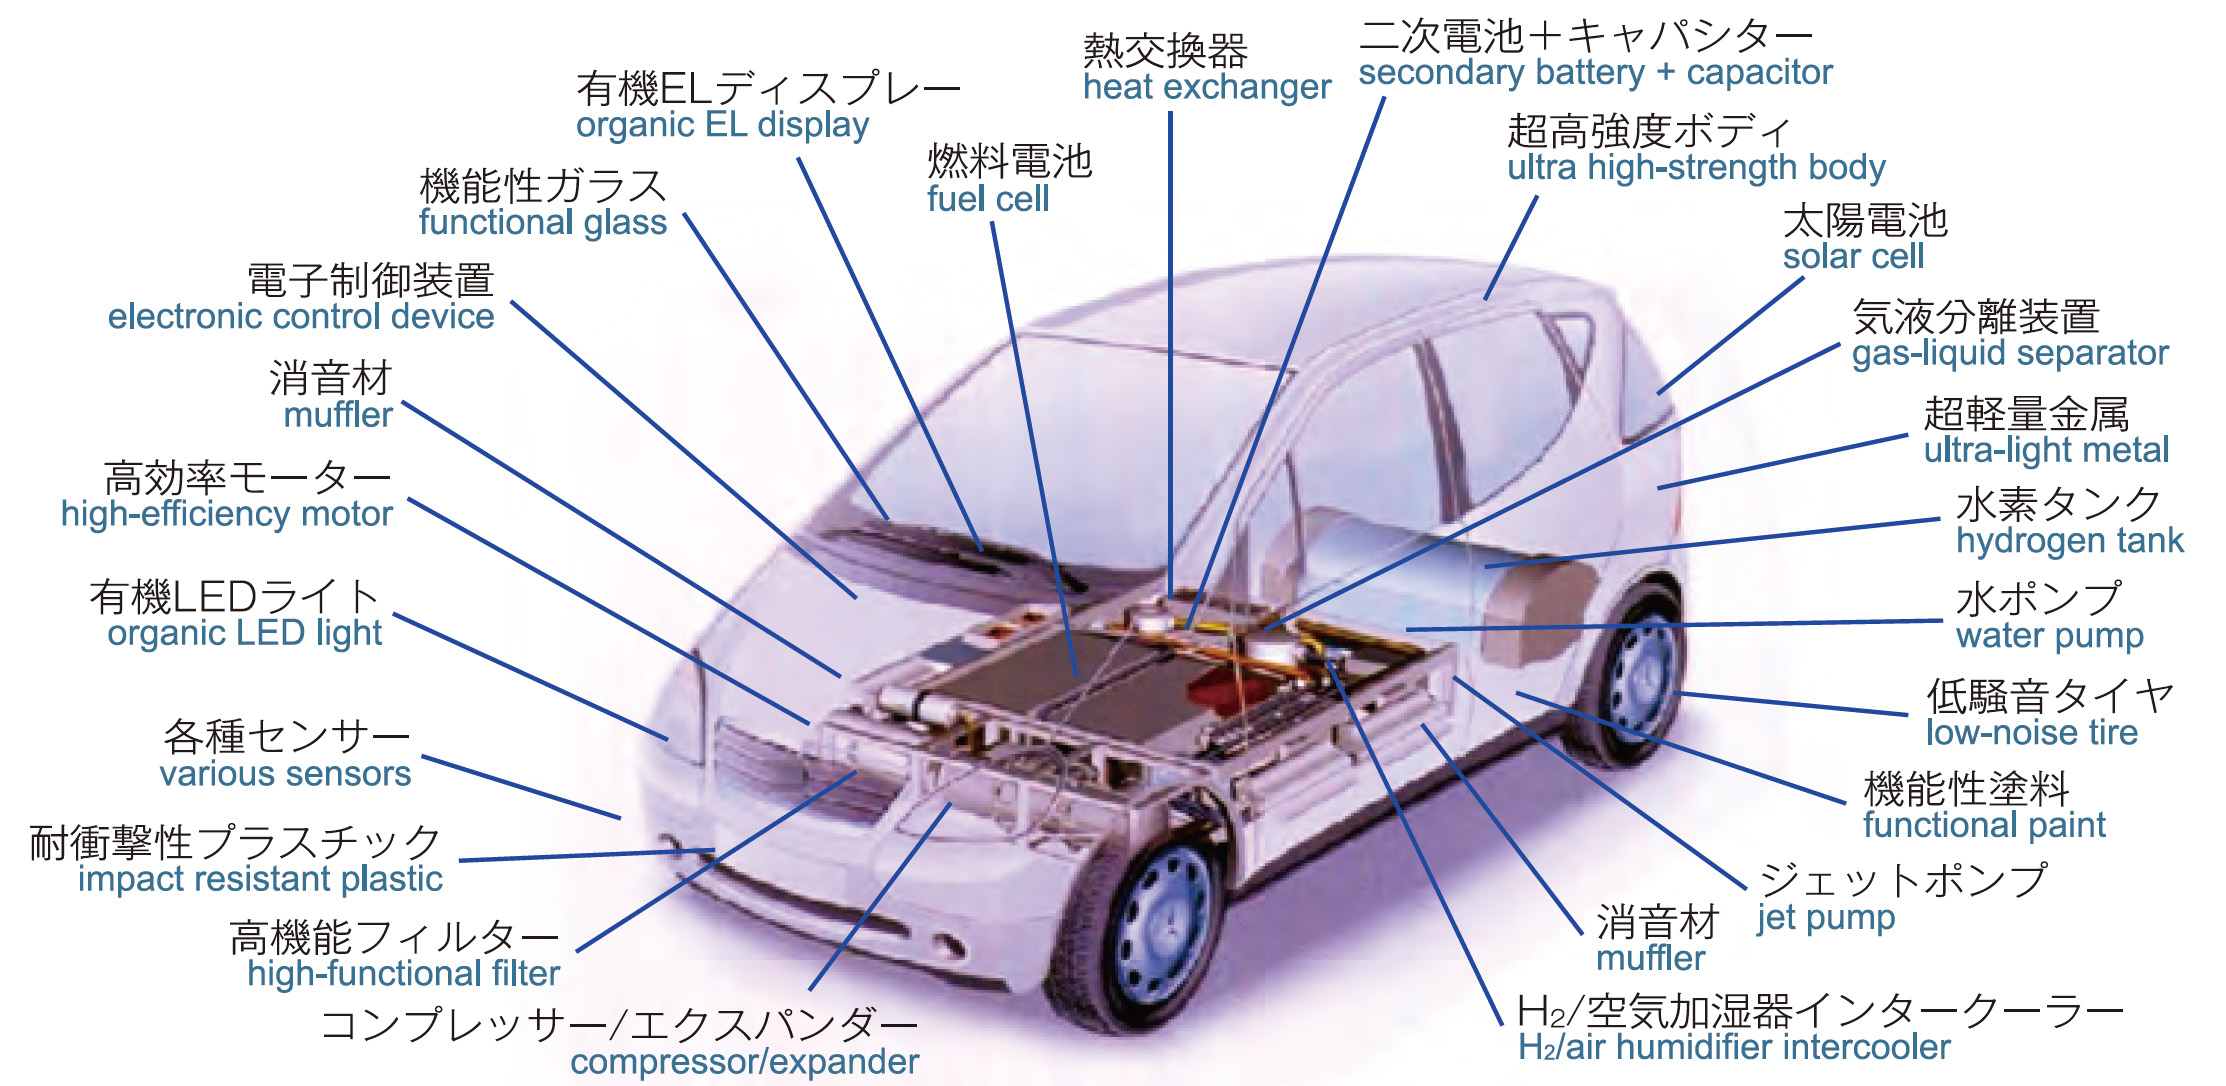 Eco-Friendly Future-Oriented Automobiles to be Realized by Advanced Materials and Chemistry